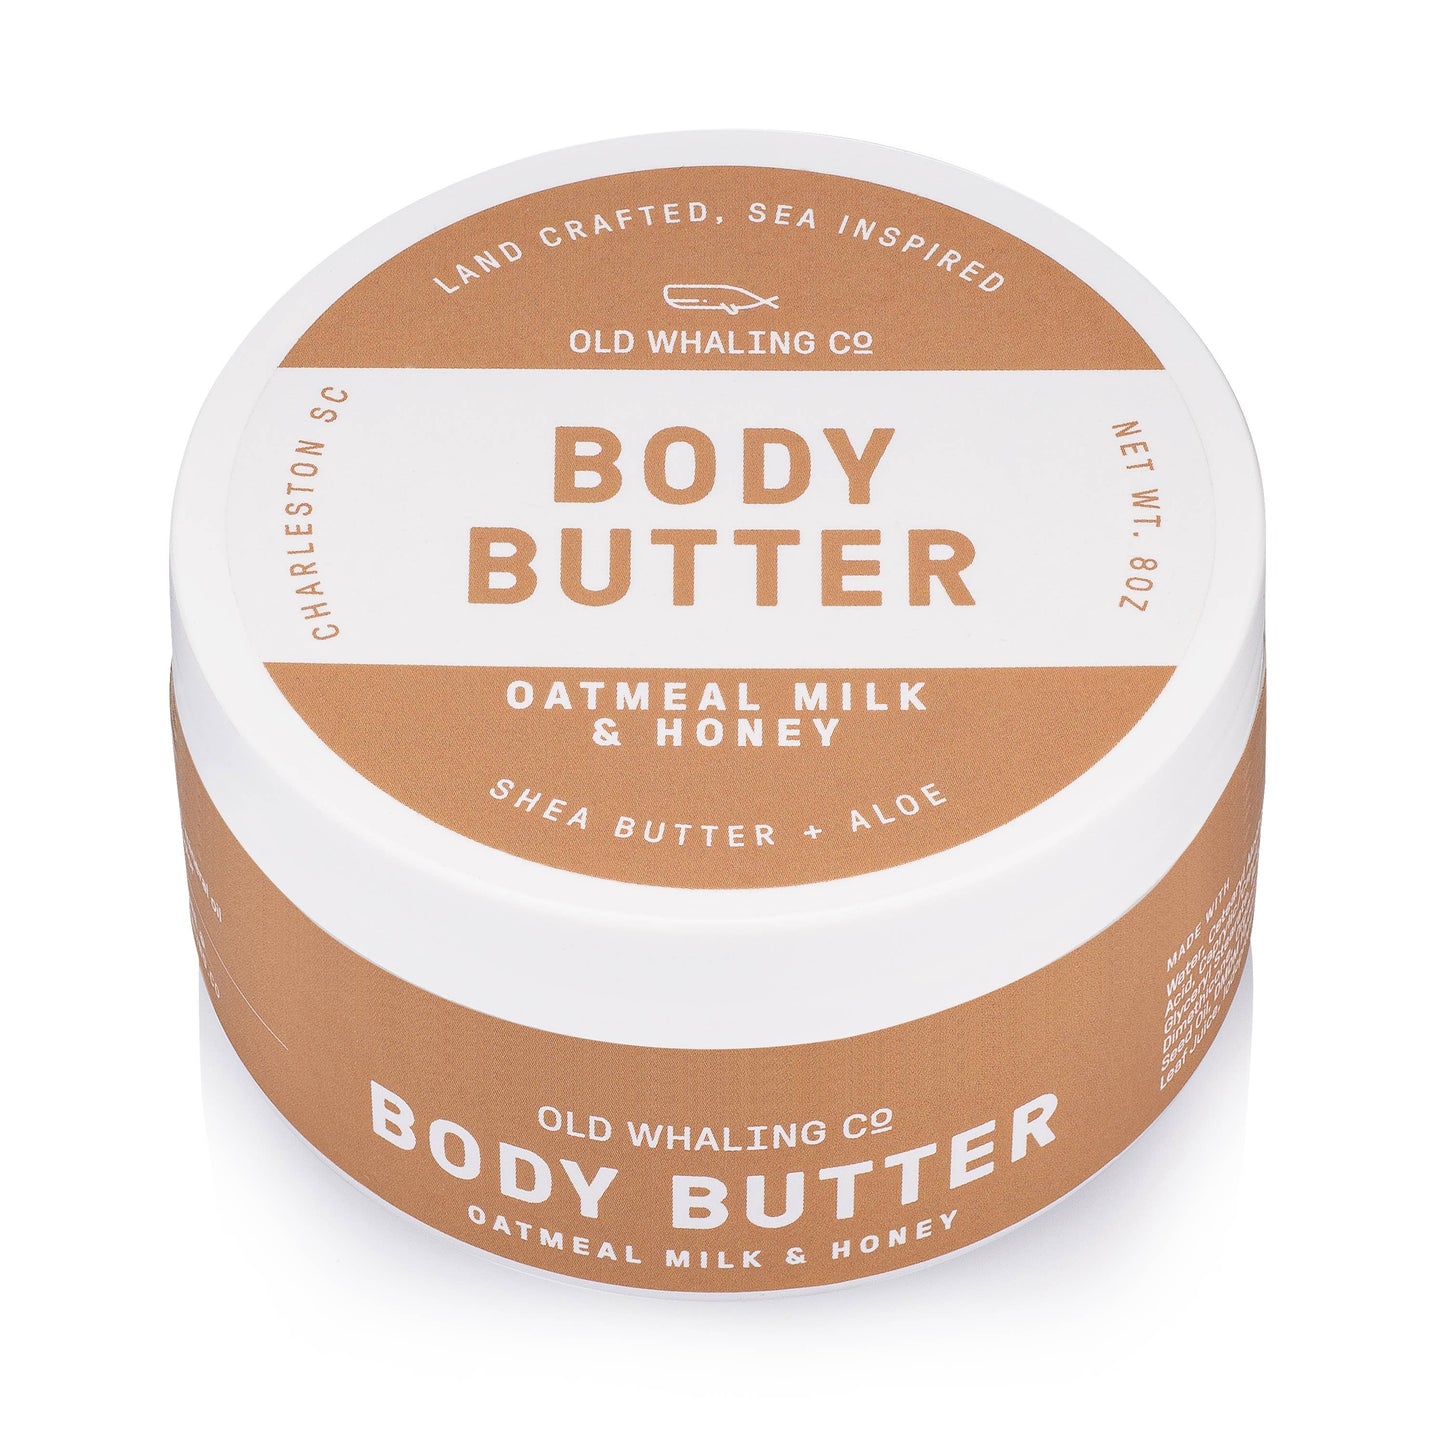 Oatmeal Milk & Honey Body Butter (8oz)-Old Whaling Company-Sister Shirts, Cute & Custom Tees for Mama & Littles in Trussville, Alabama.